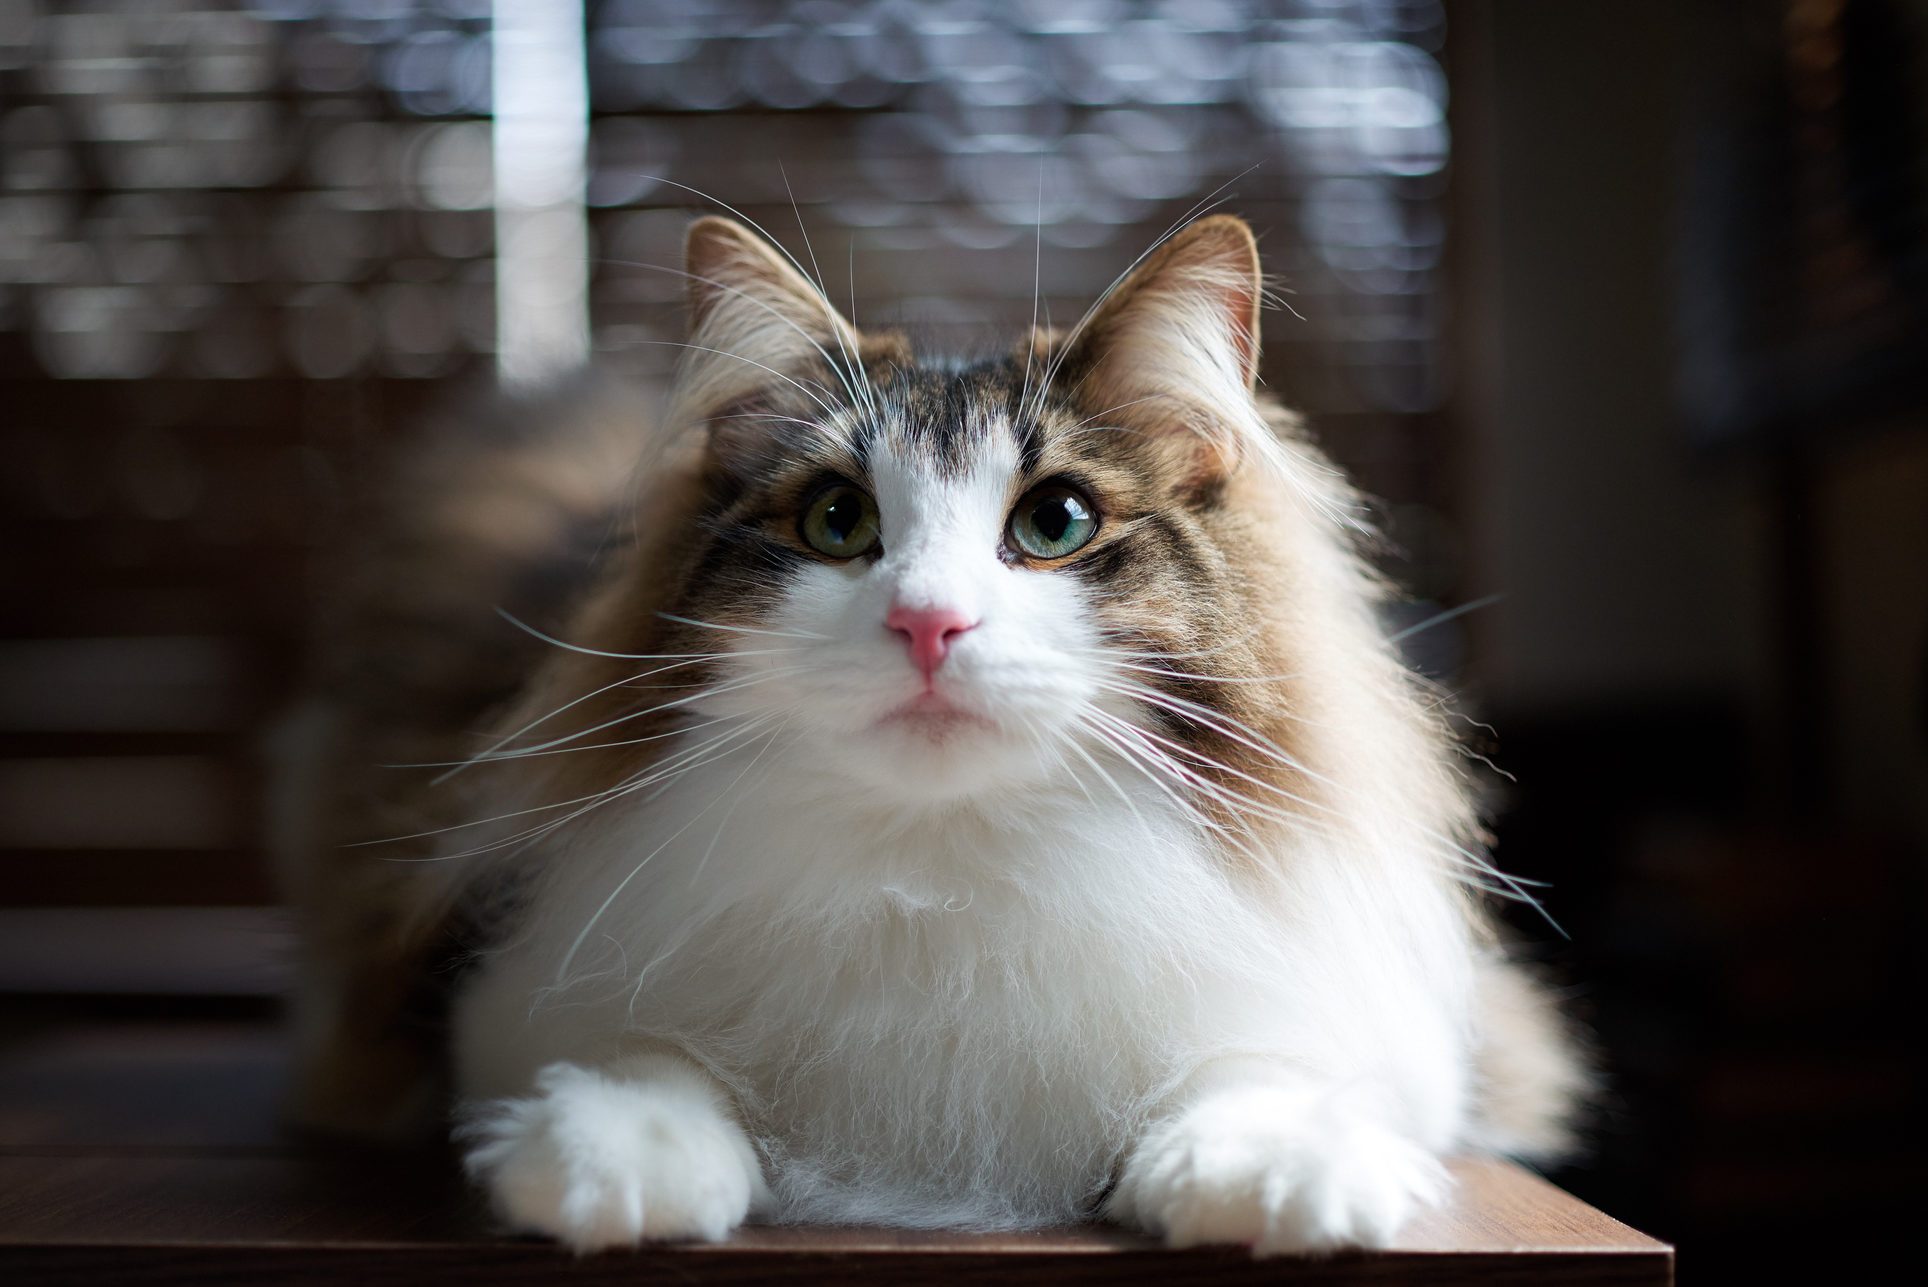 Fluffy Cat Breeds That Are Perfect for Snuggling Reader's Digest